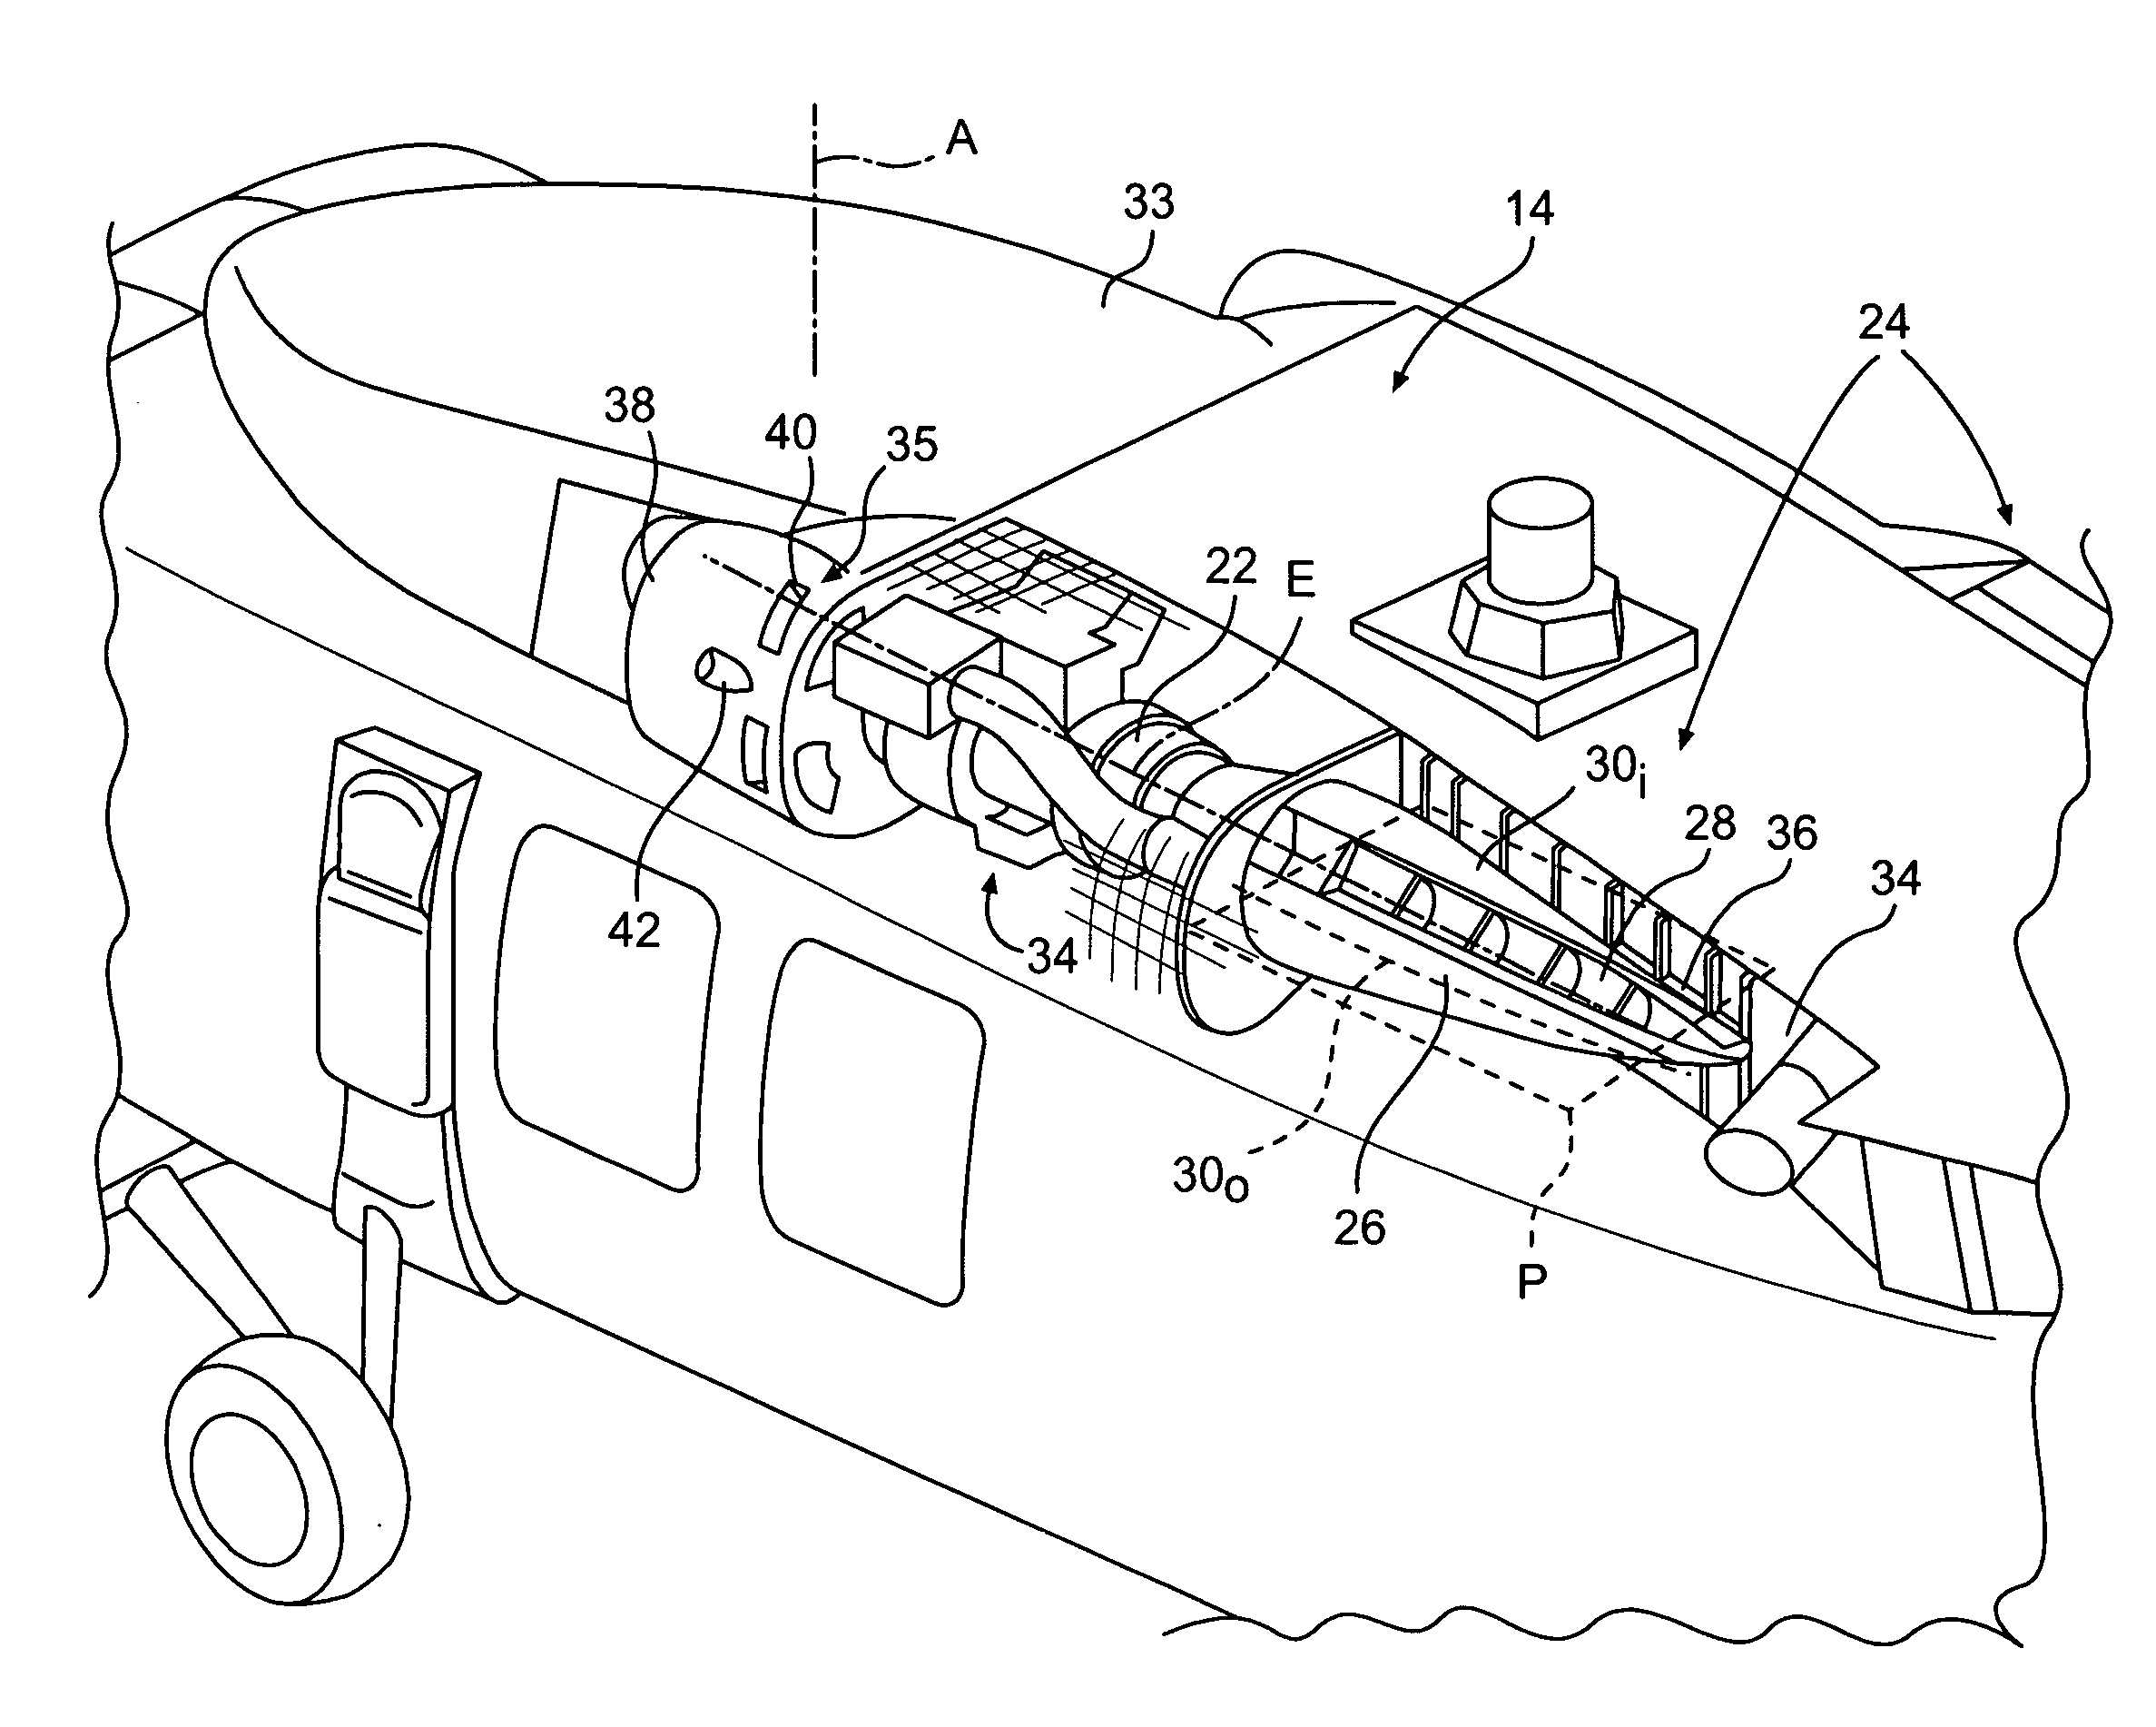 Infrared suppression system